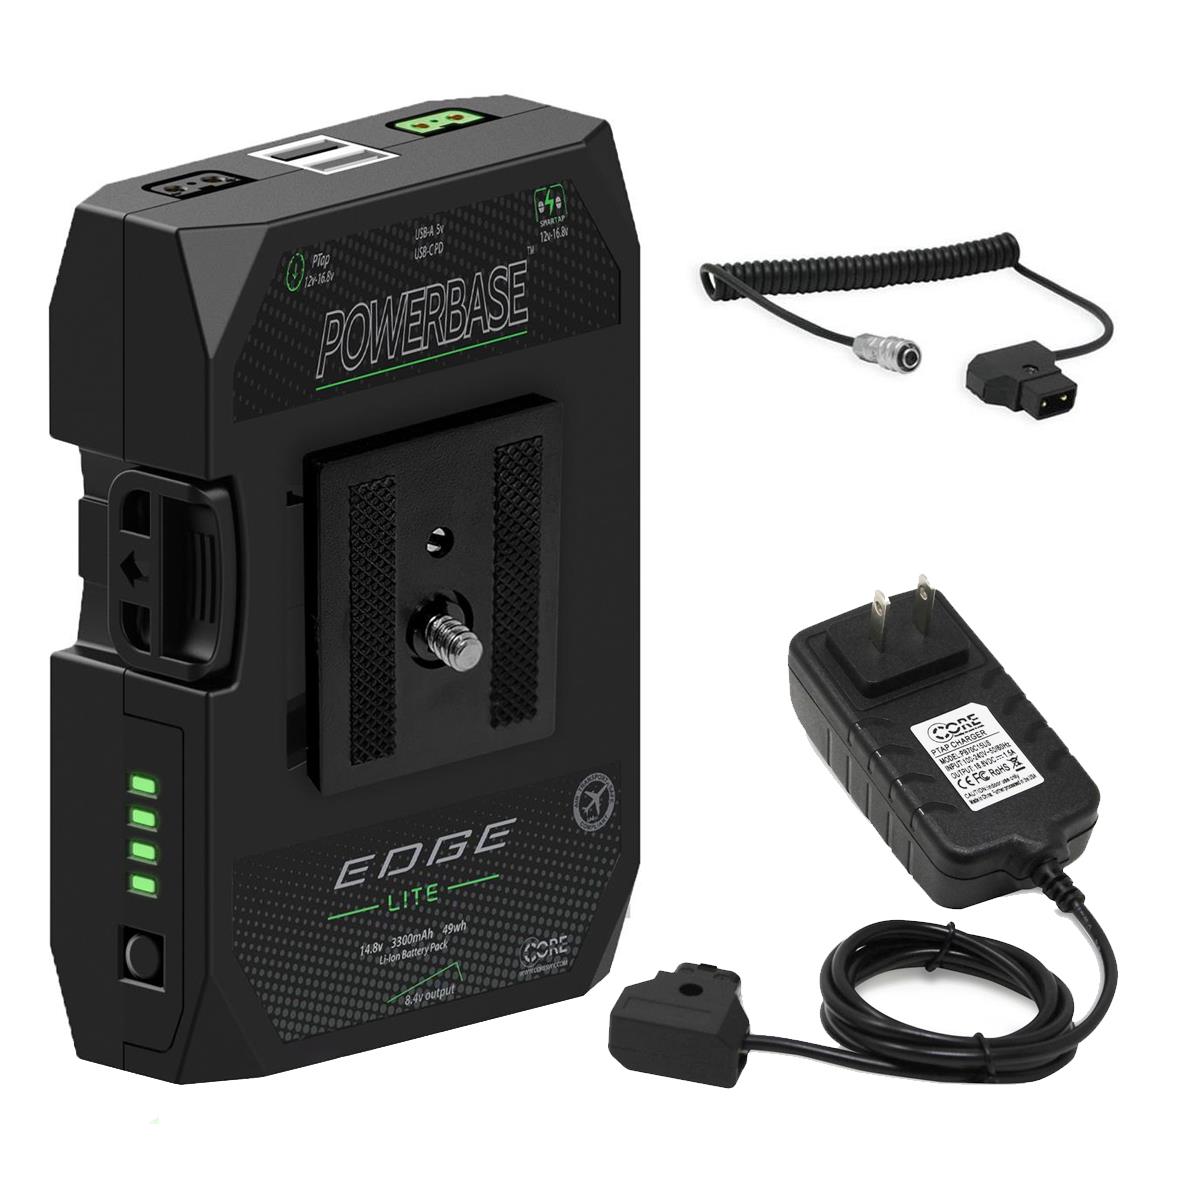 

Core SWX PowerBase Edge Lite 49Wh Battery Pack w/Charger, Cable for Blackmagic